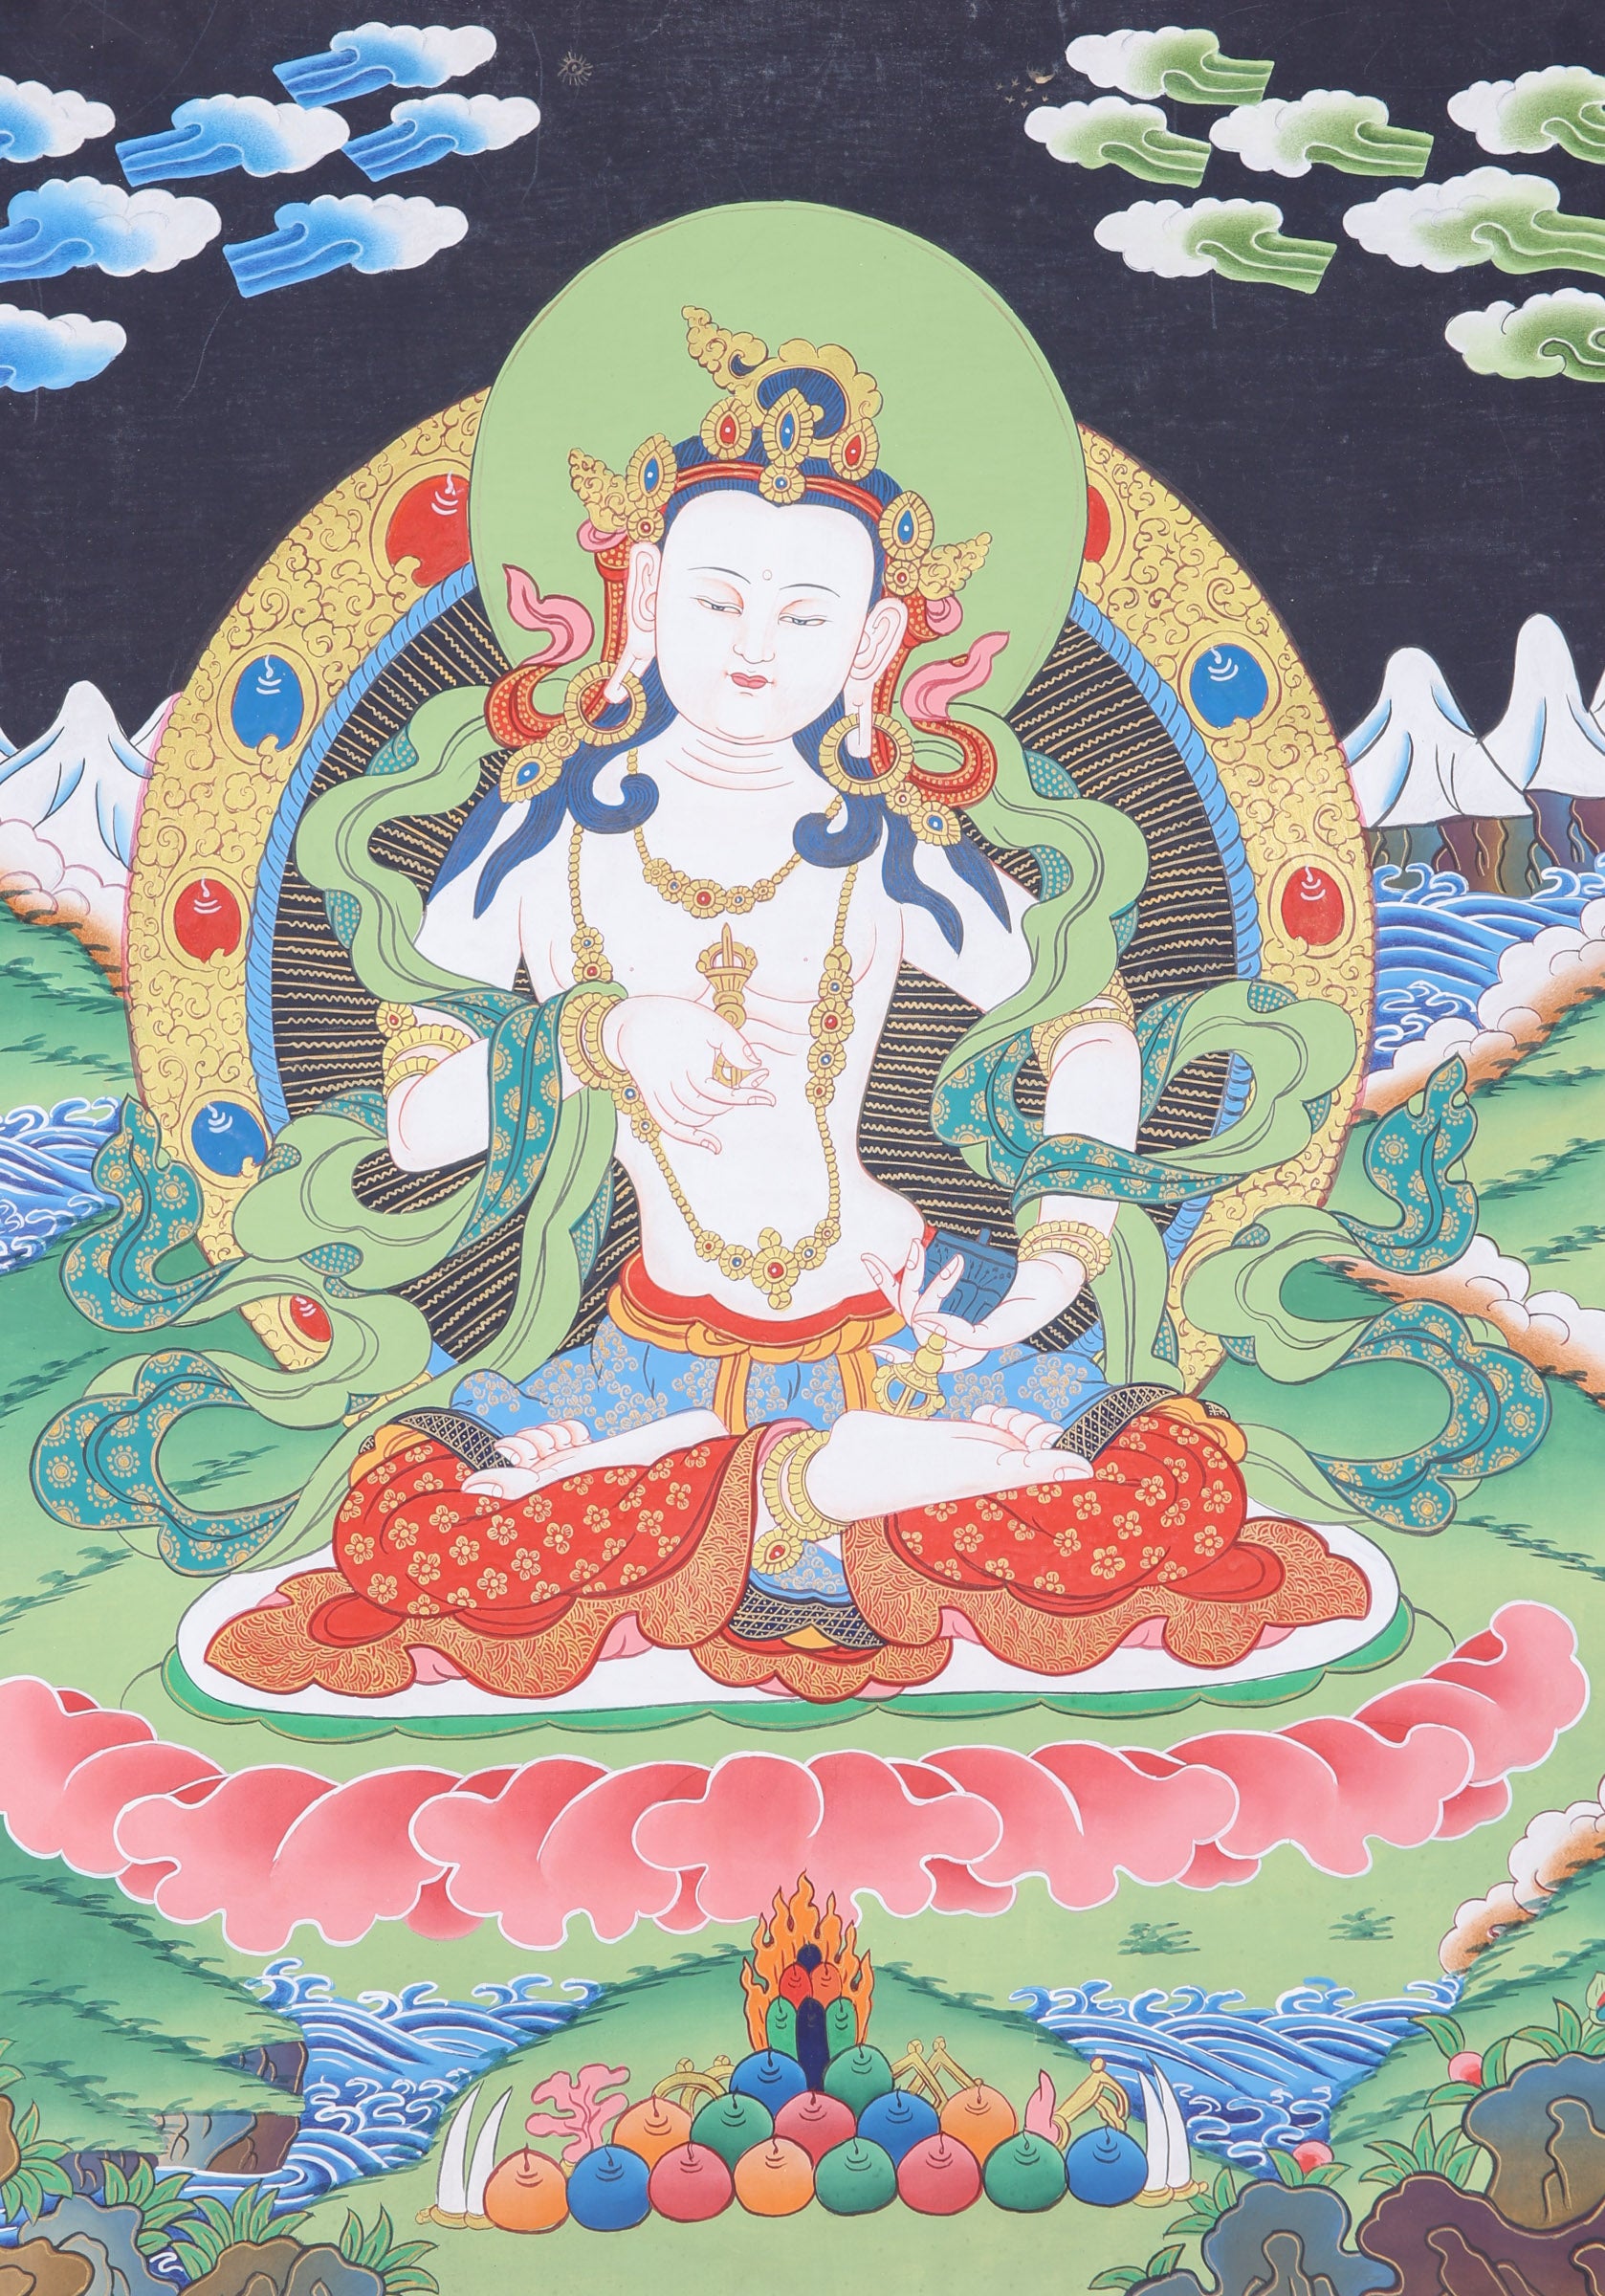 Vajrasattva Thangka Painting for purification practices.